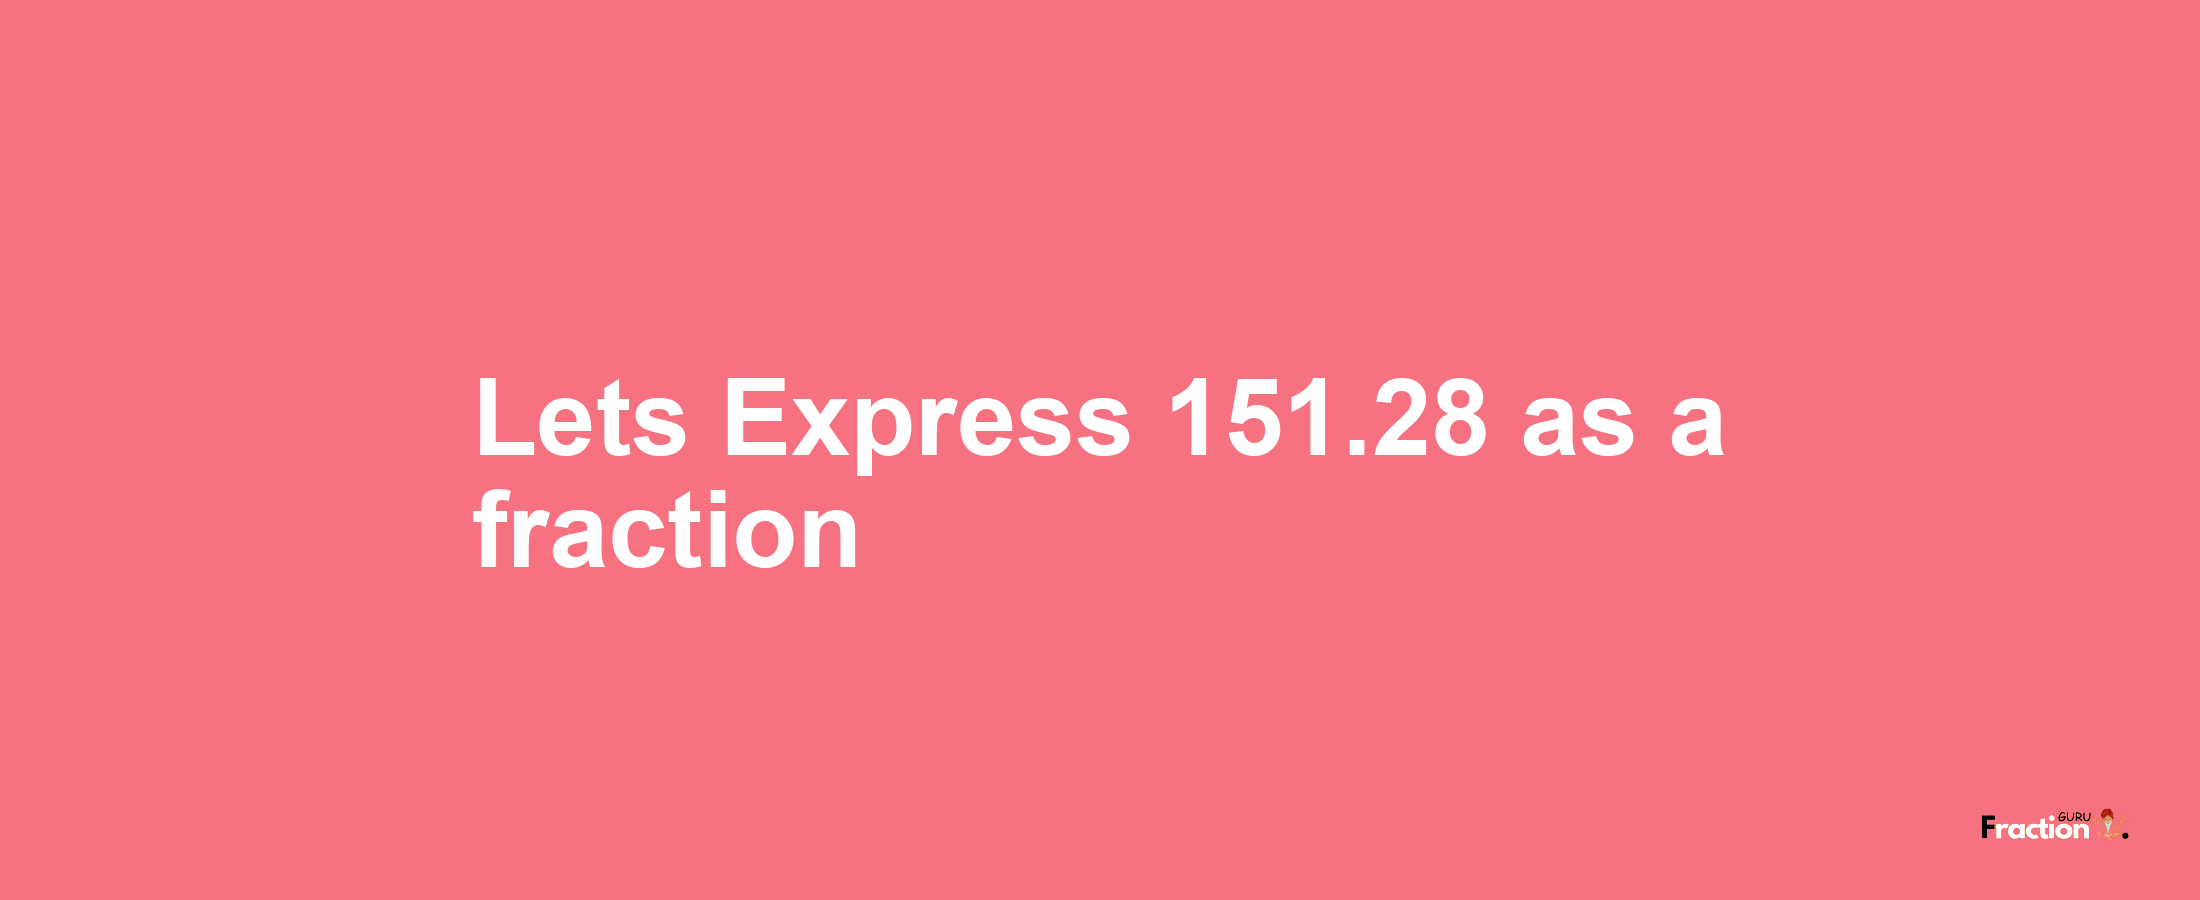 Lets Express 151.28 as afraction